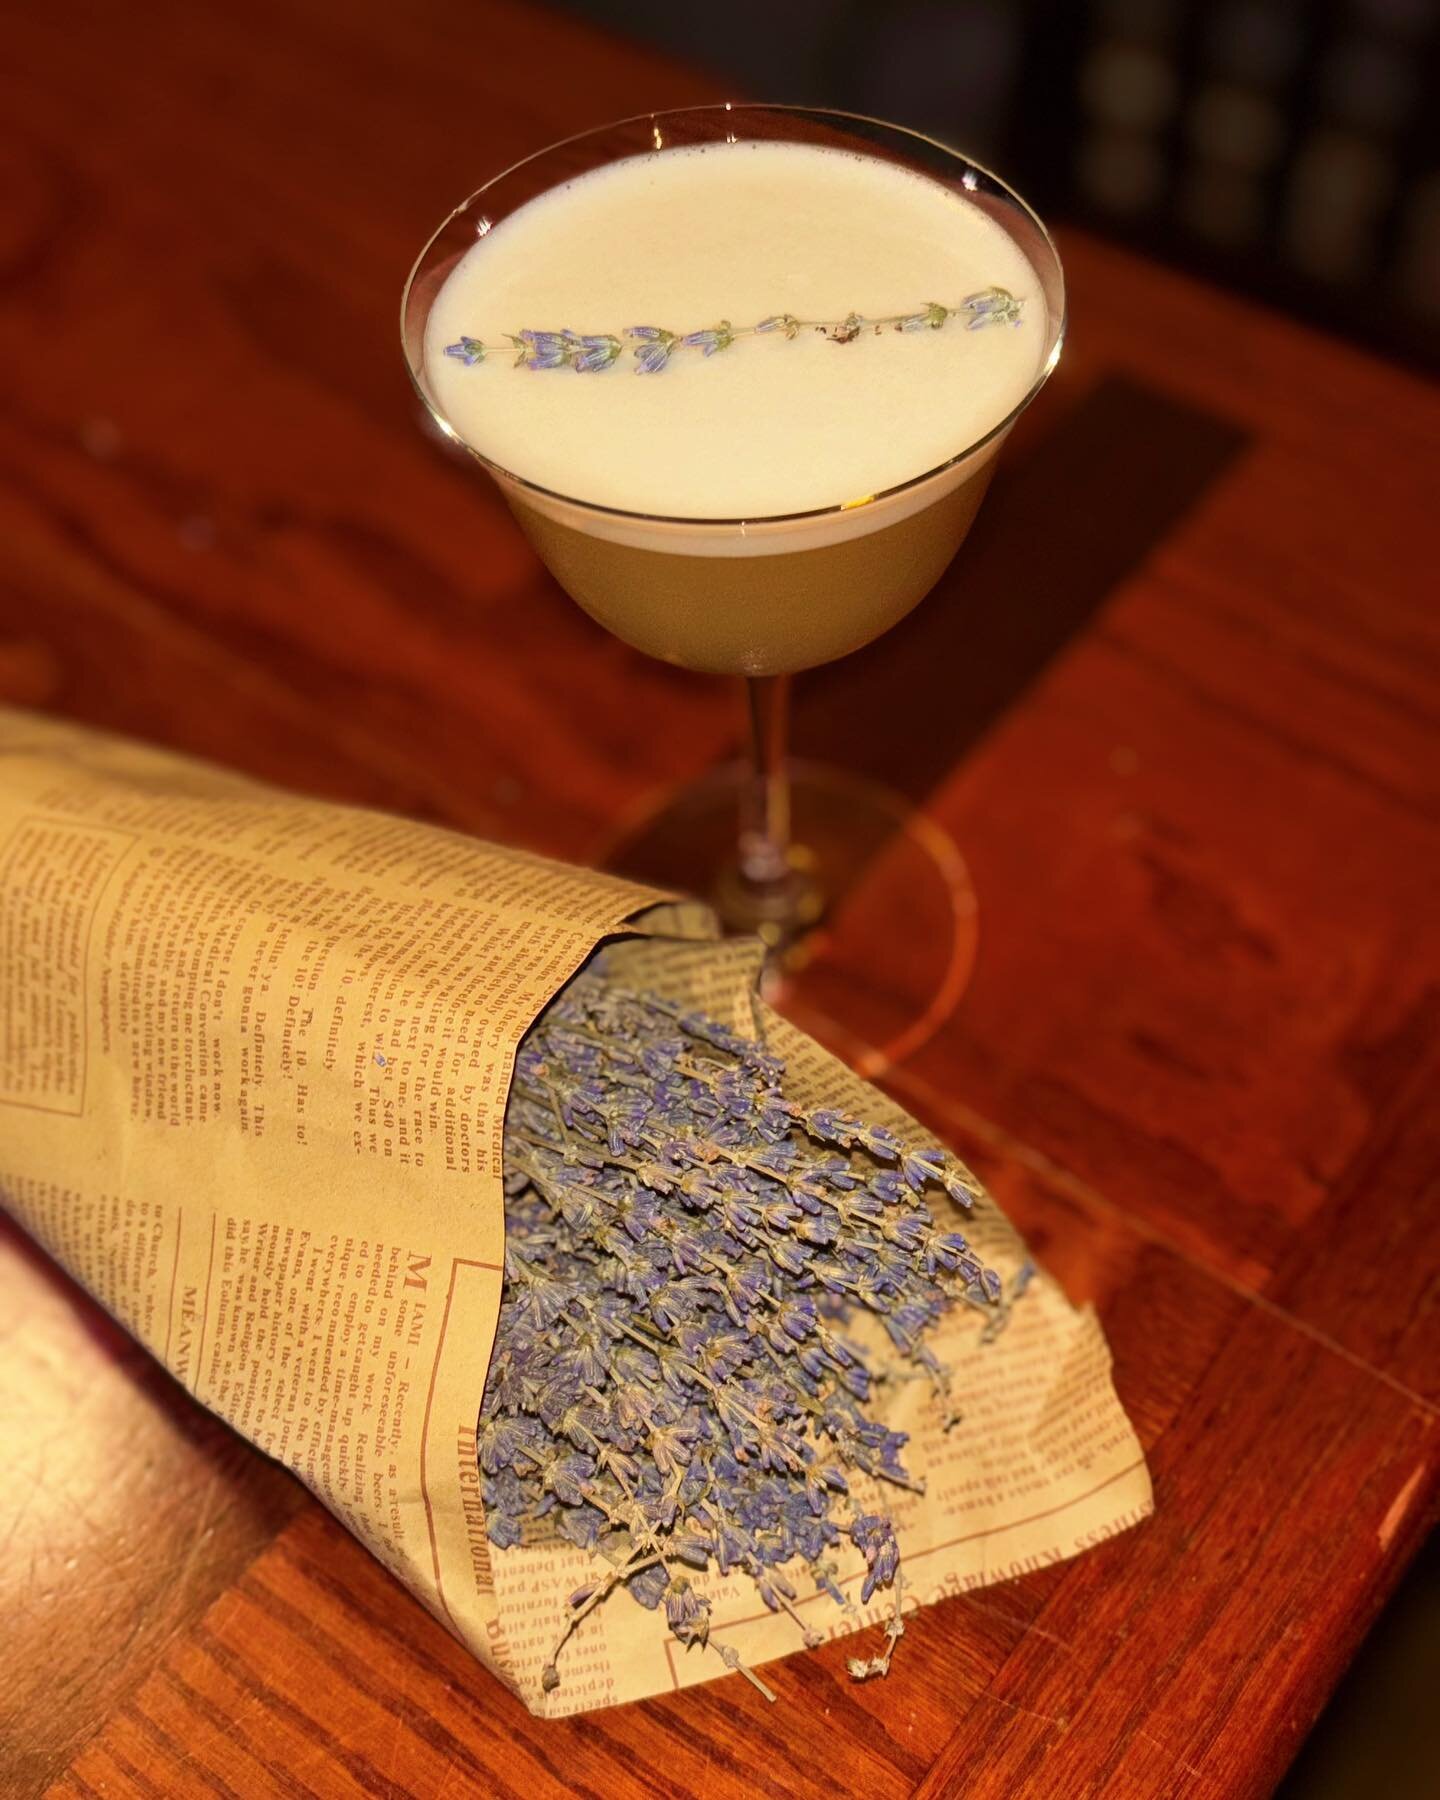 Introducing a sophisticated London fog cocktail that blends a house crafted Earl Grey tea-infused vodka with hints of lemon and lavender. This cocktail offers a balance of bright botanical notes, velvety textures, and a touch of sweetness. Starting F